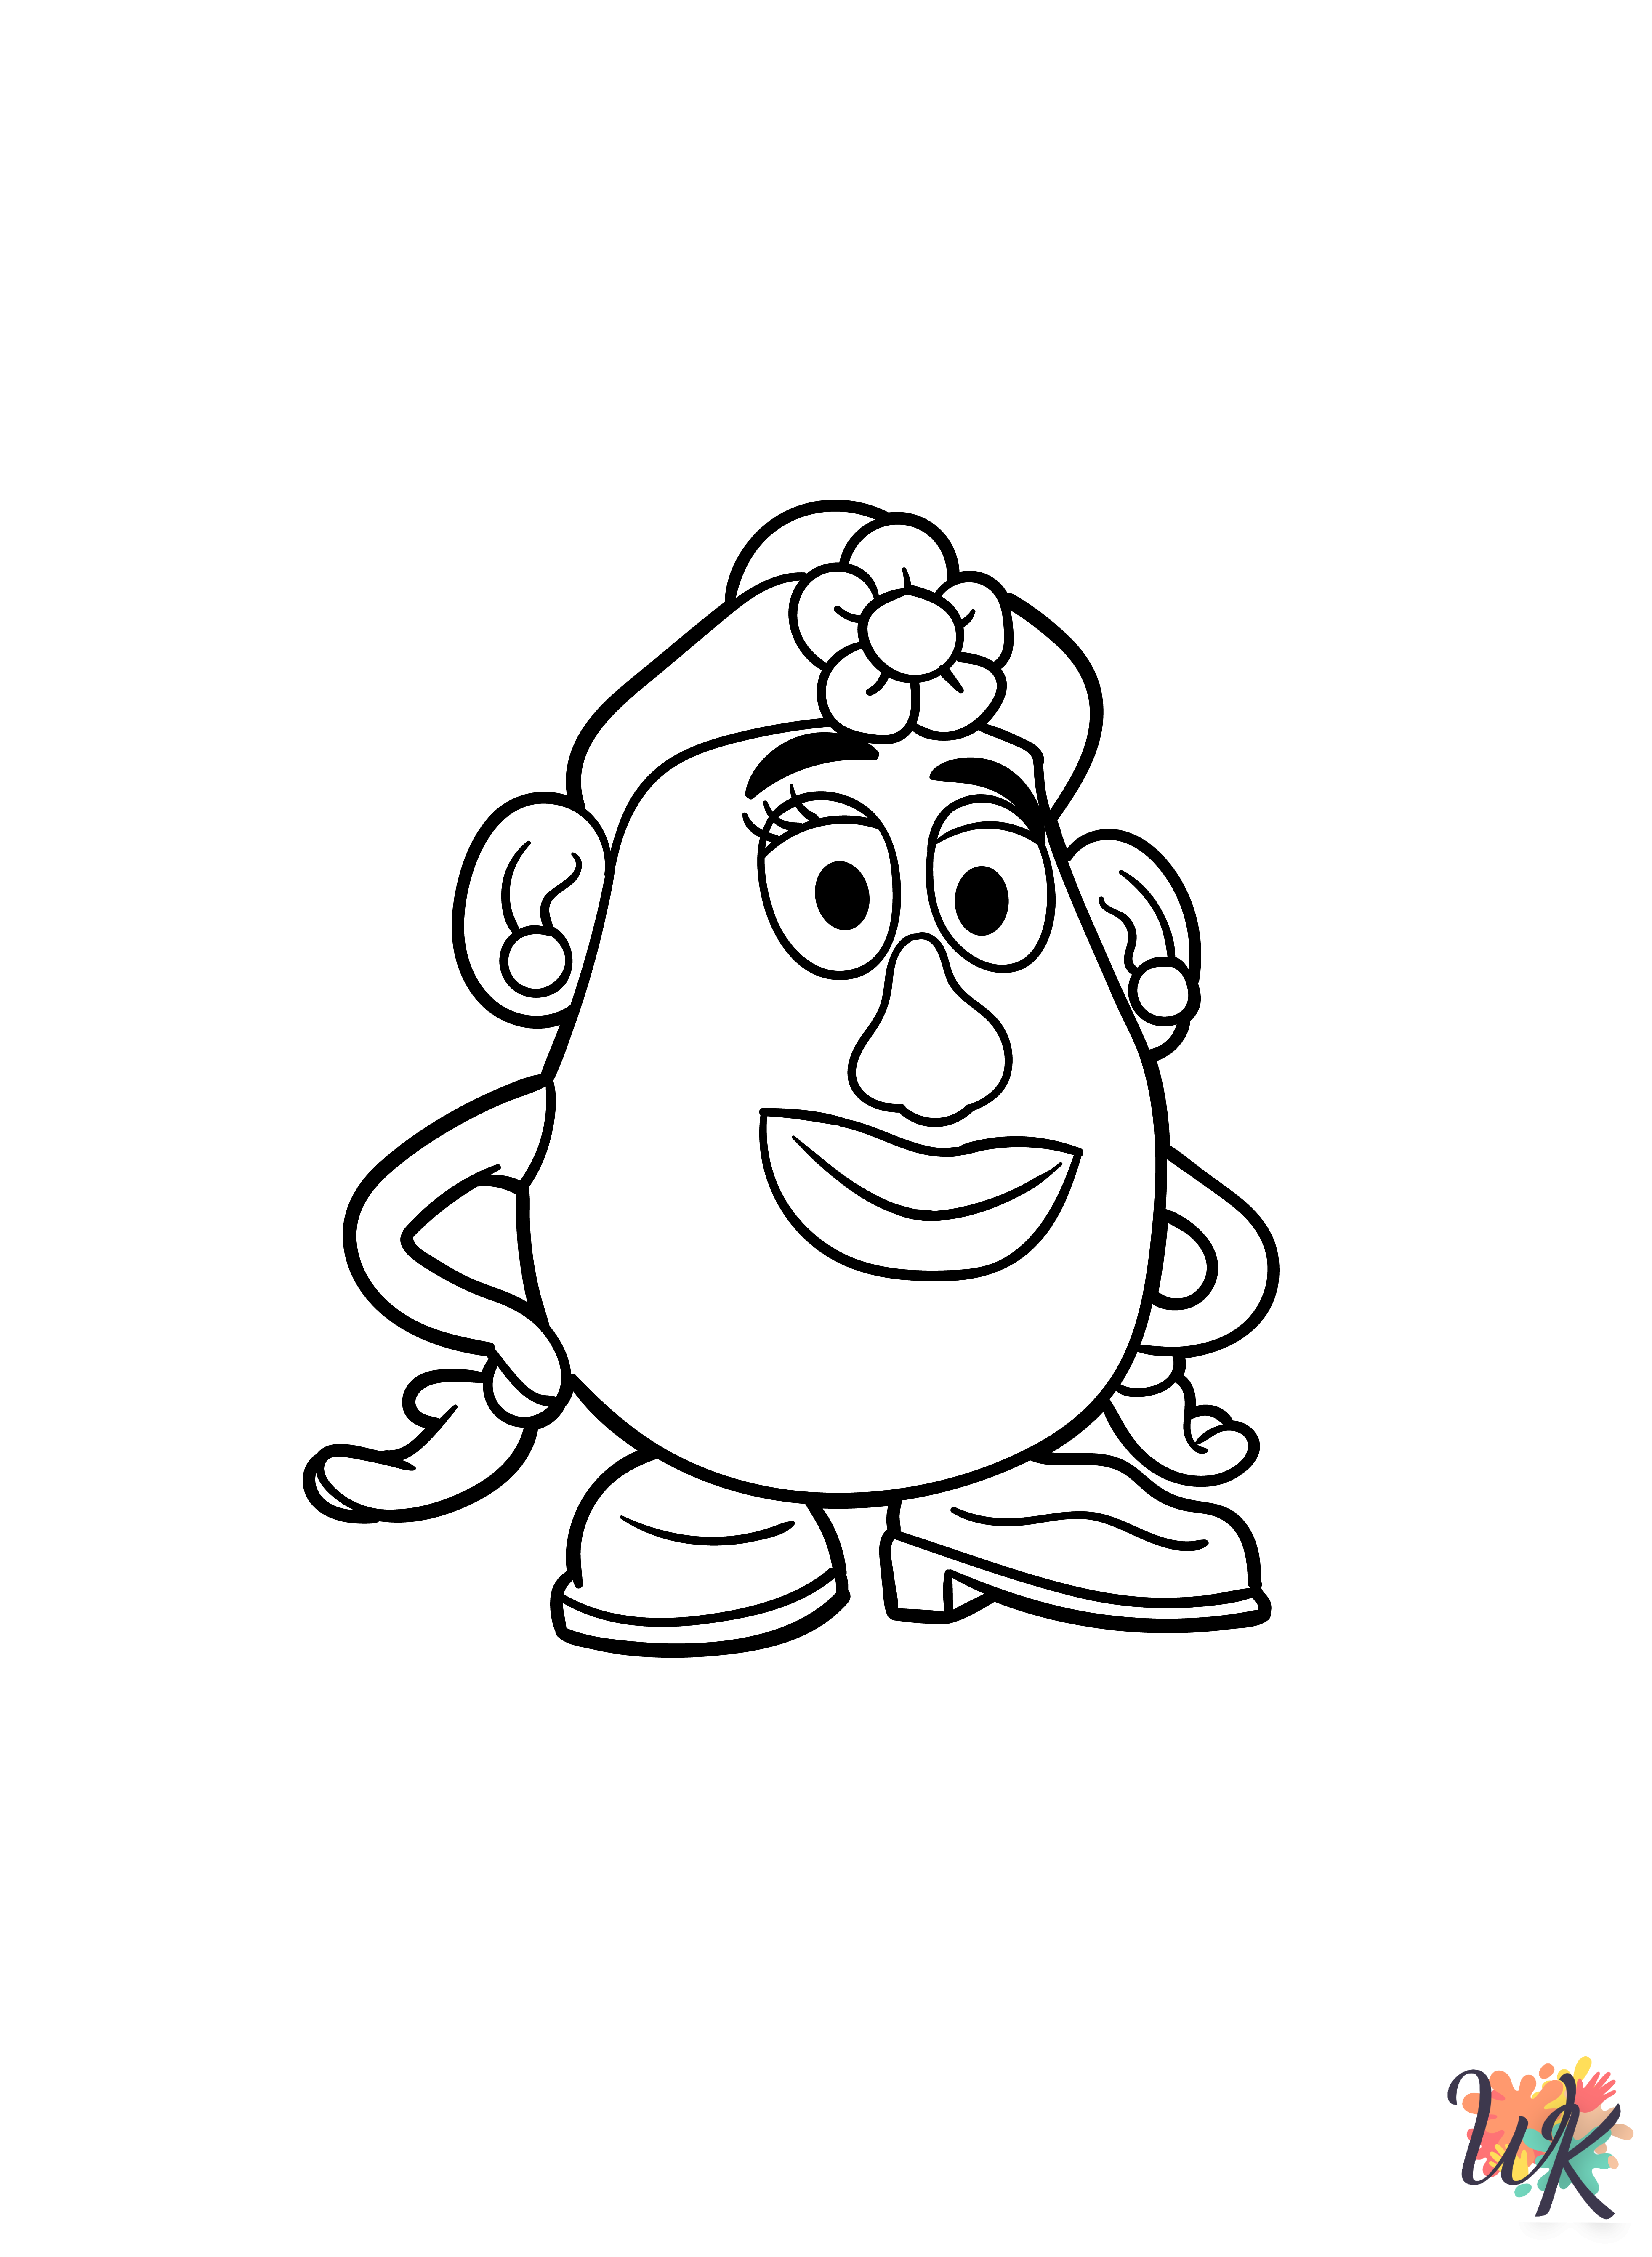 Toy Story coloring pages printable